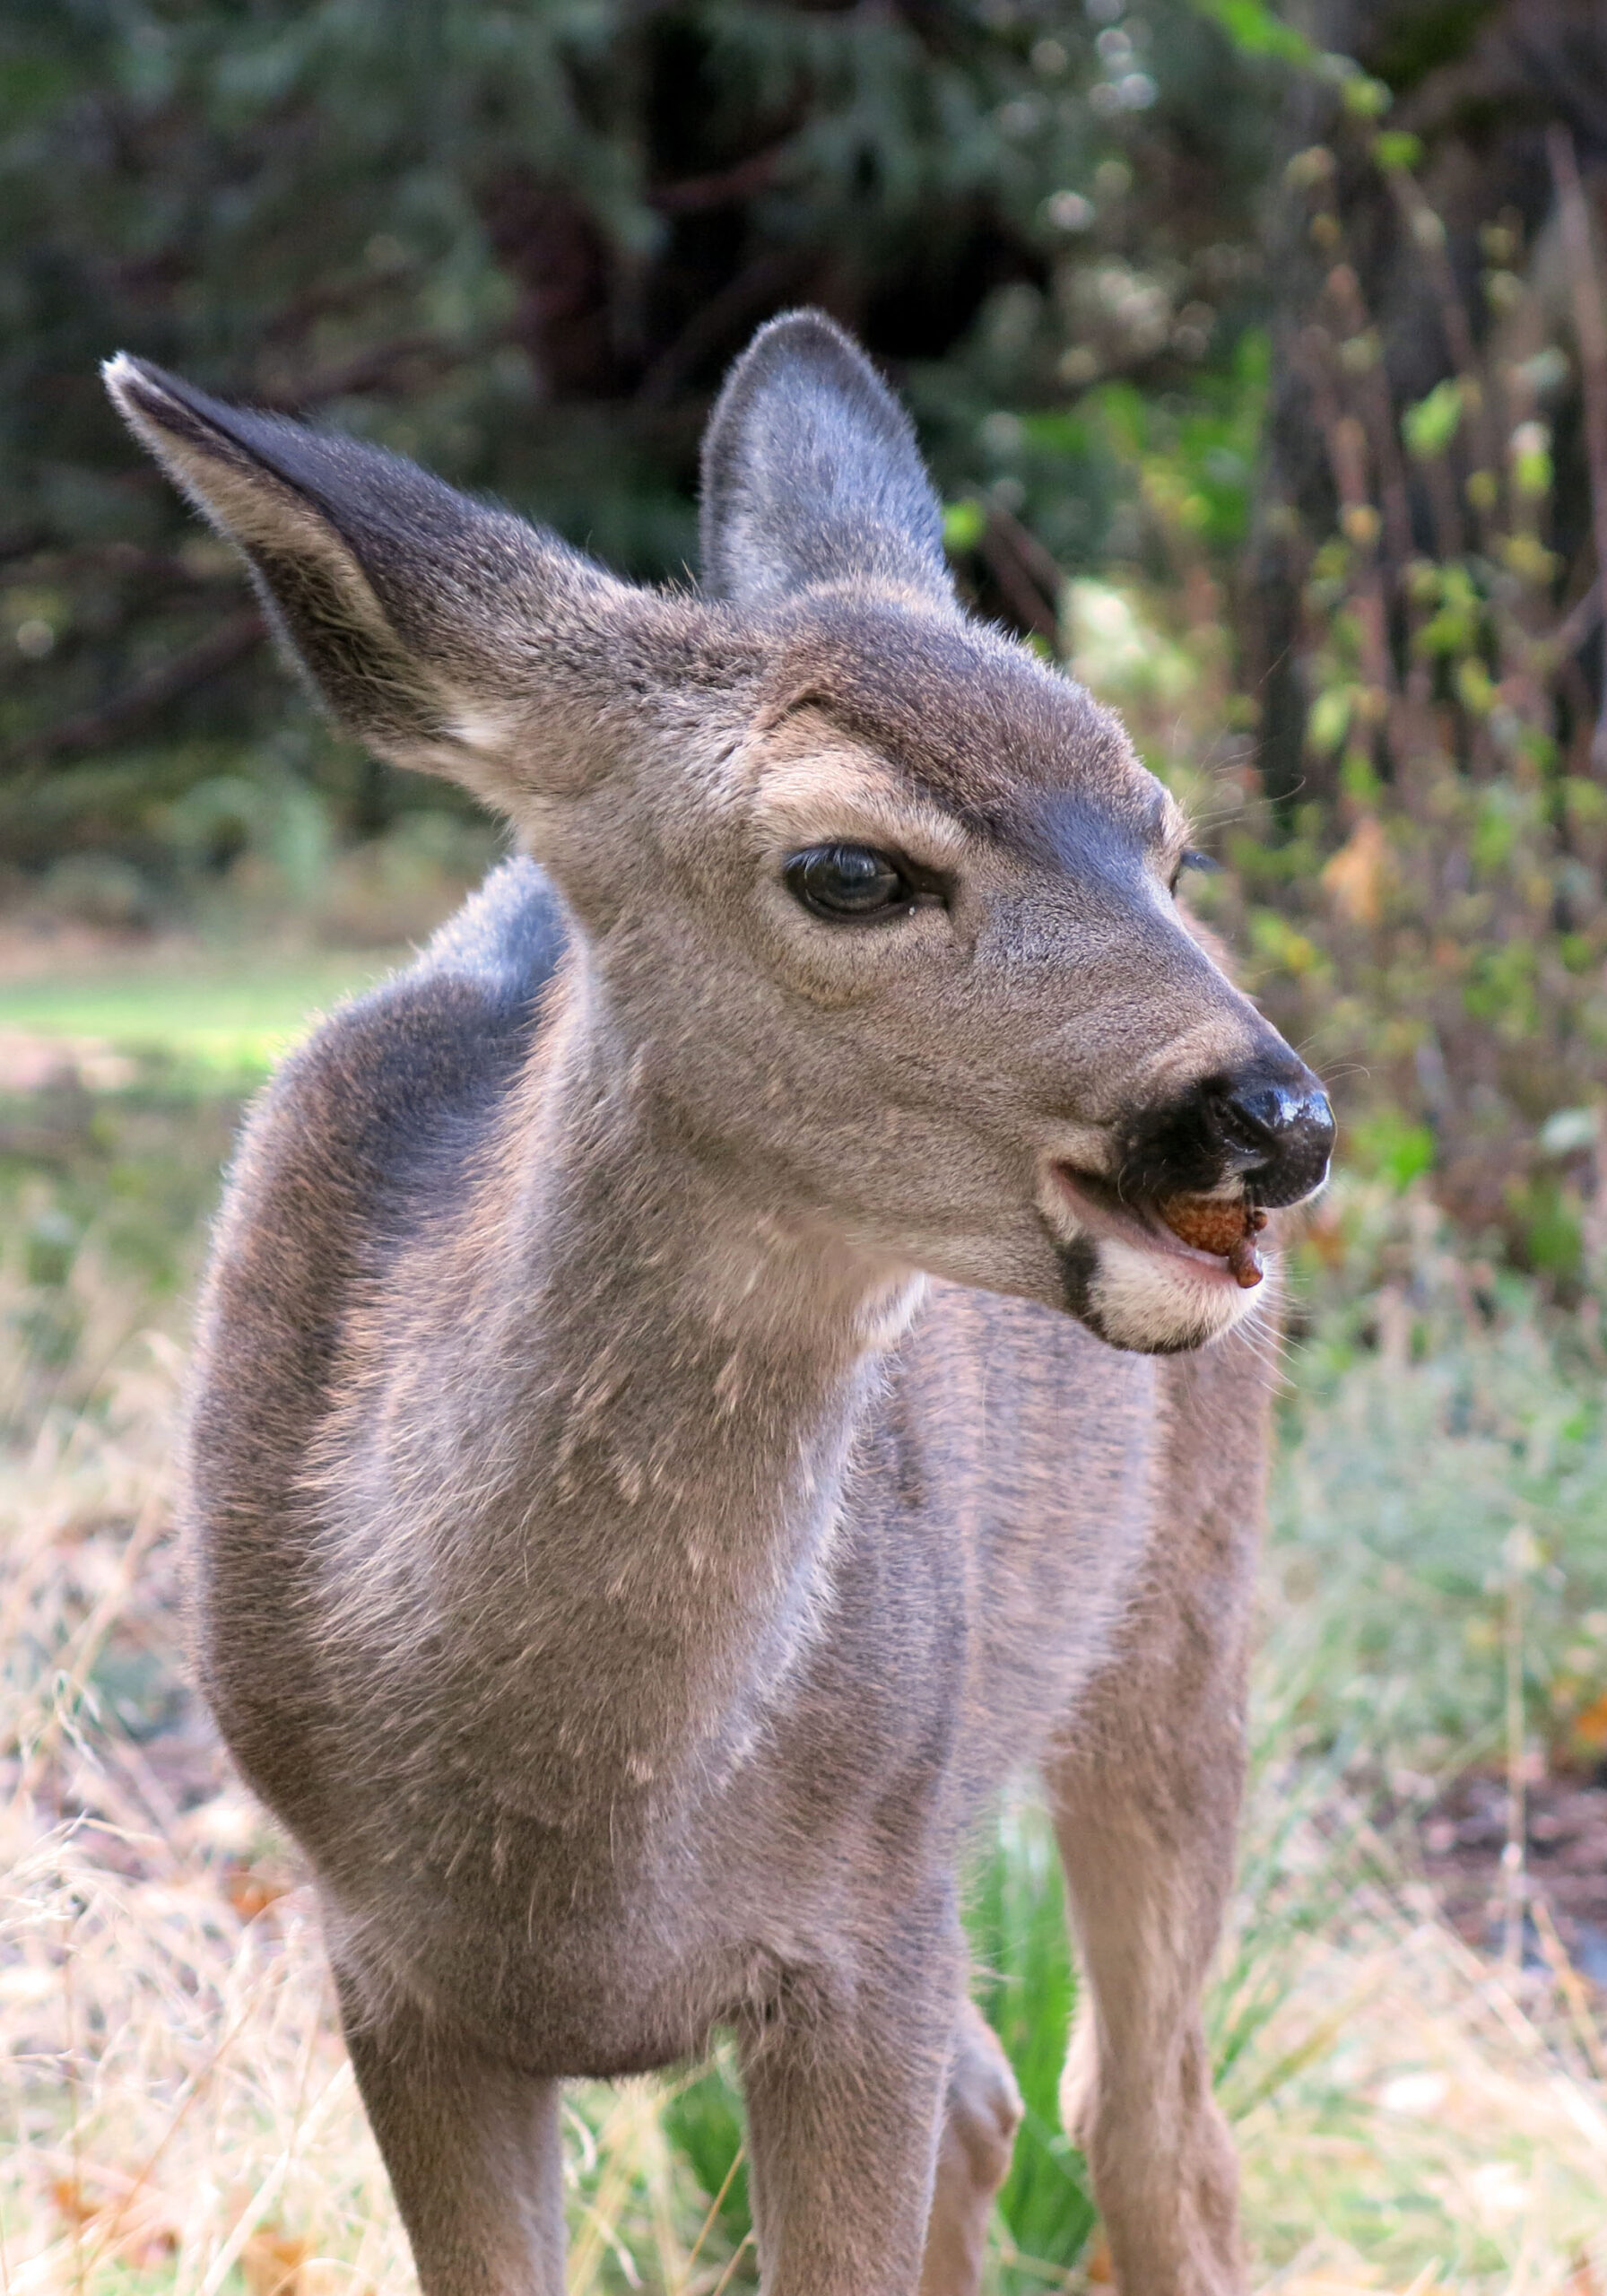 Whitetail does prefer acorns over many other types of natural browse